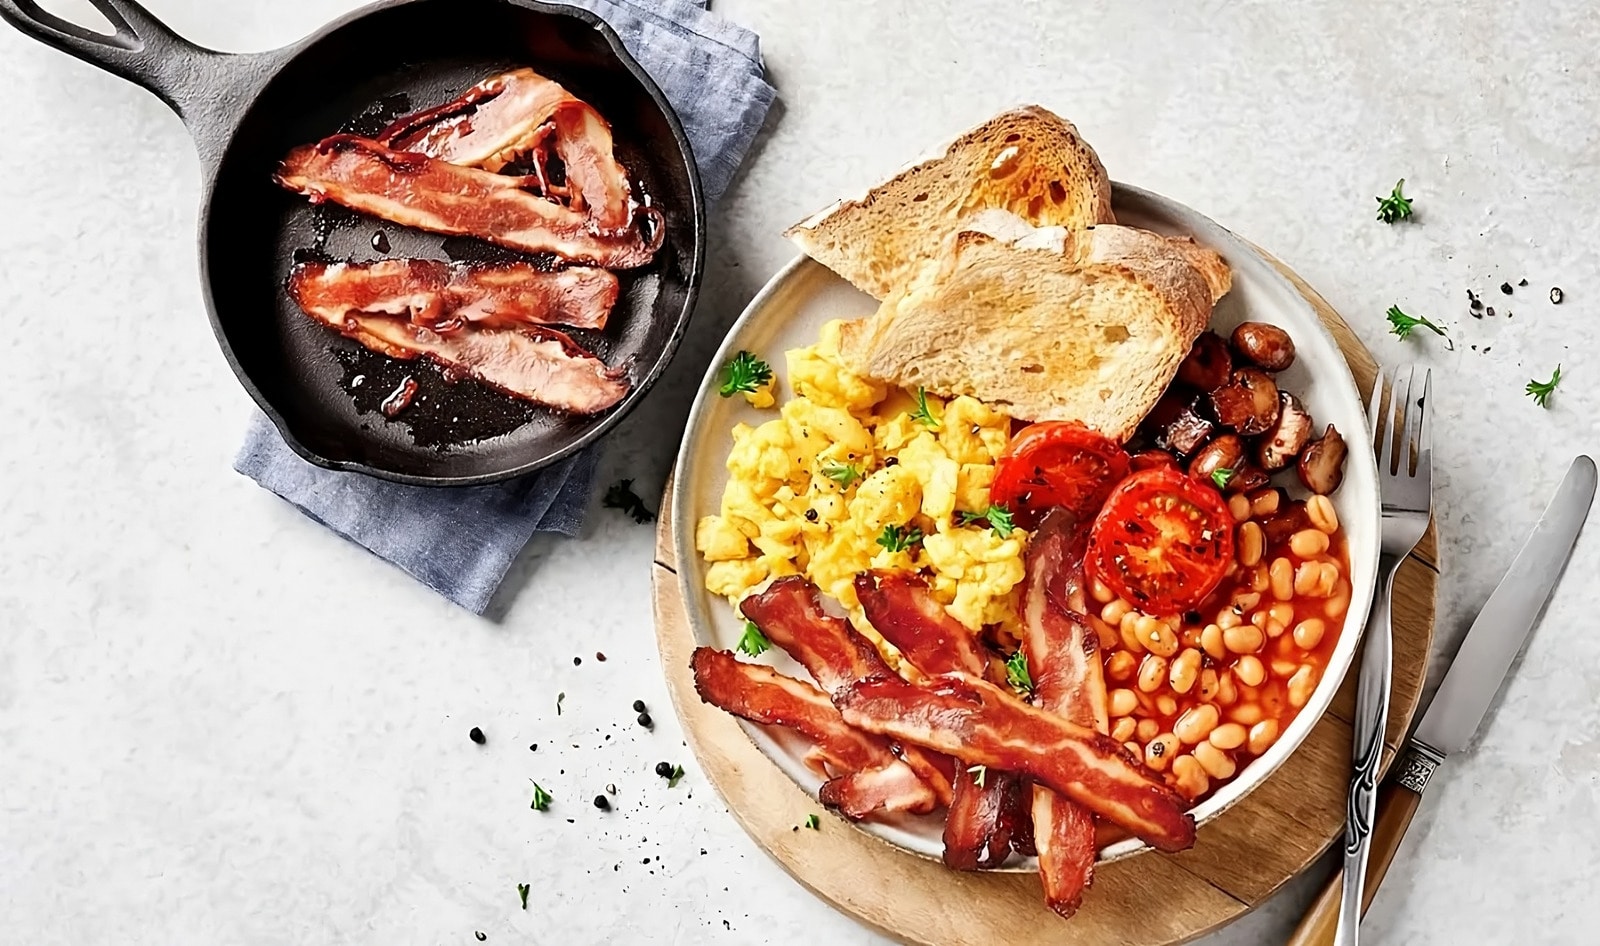 Unilever's New Vegan Bacon Technology Makes It a Worthy Contender for Meat Lovers